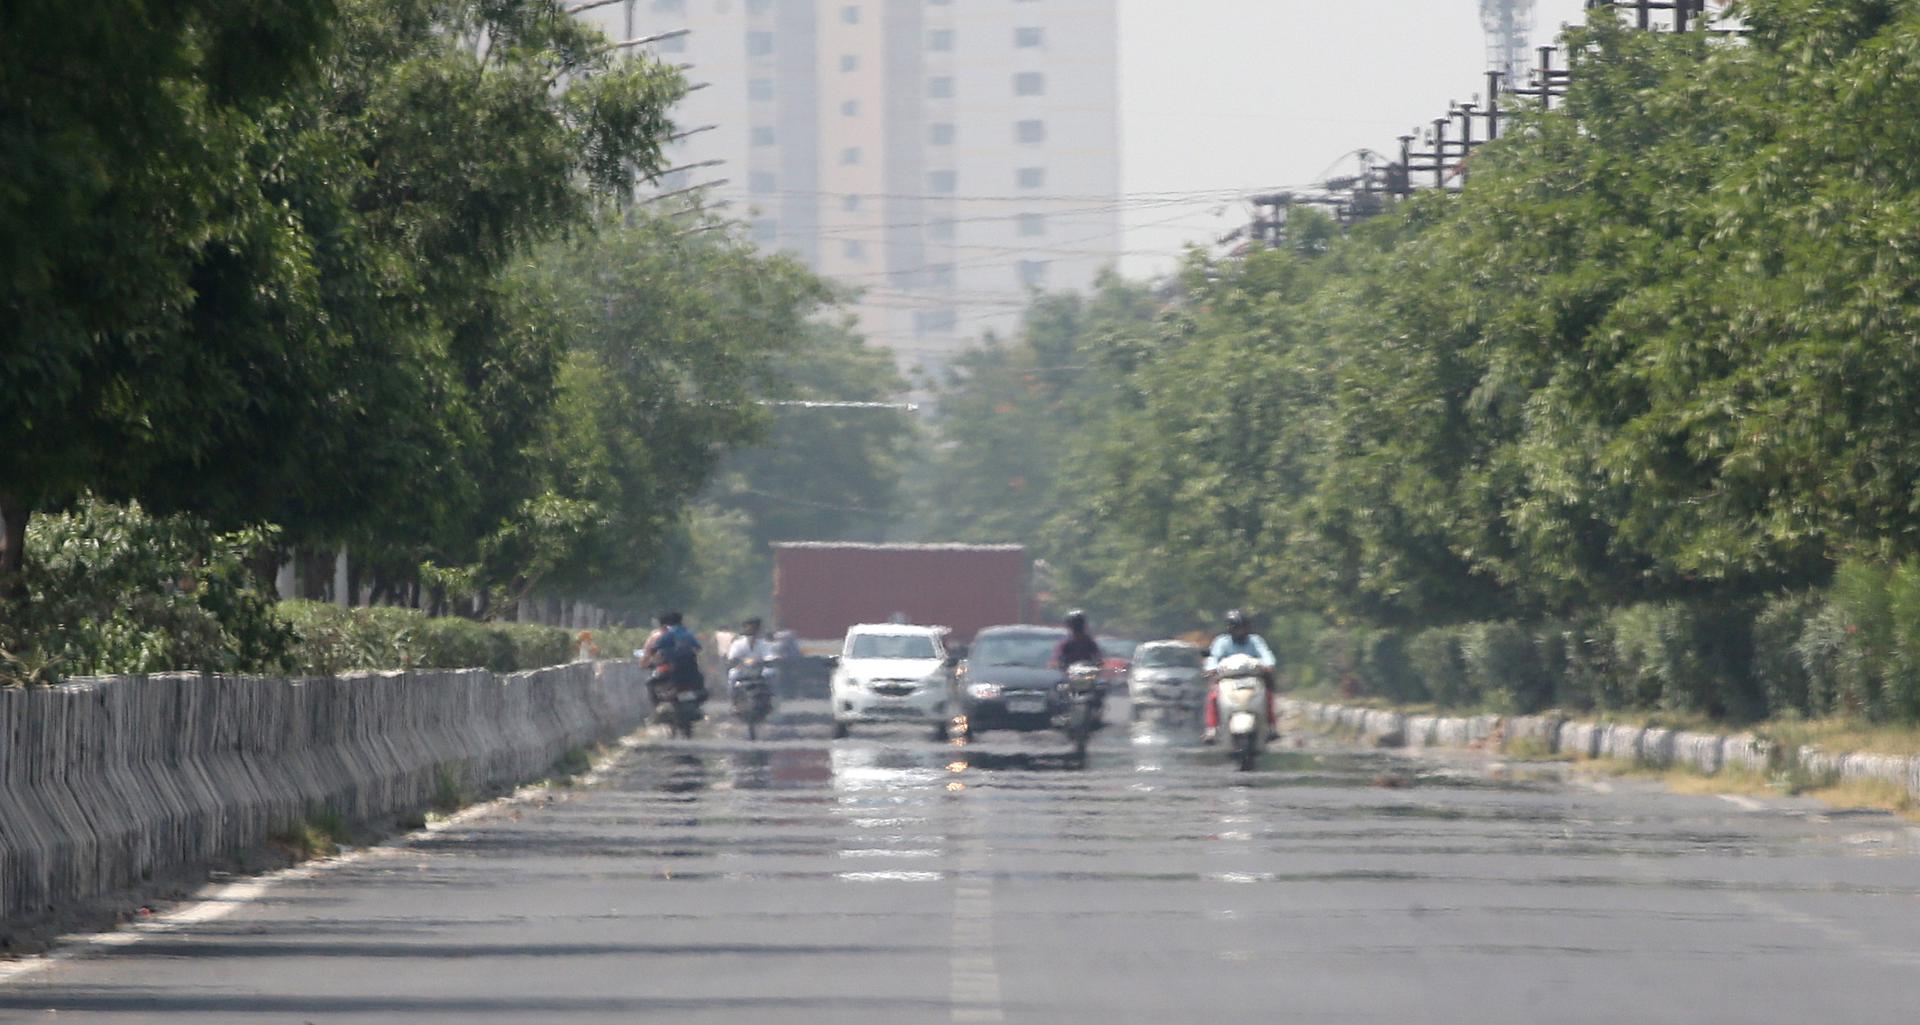 A view of heat haze occurring on the surface of a road near New Delhi, India, 28 April 2022. EFE/EPA/FILE/HARISH TYAGI